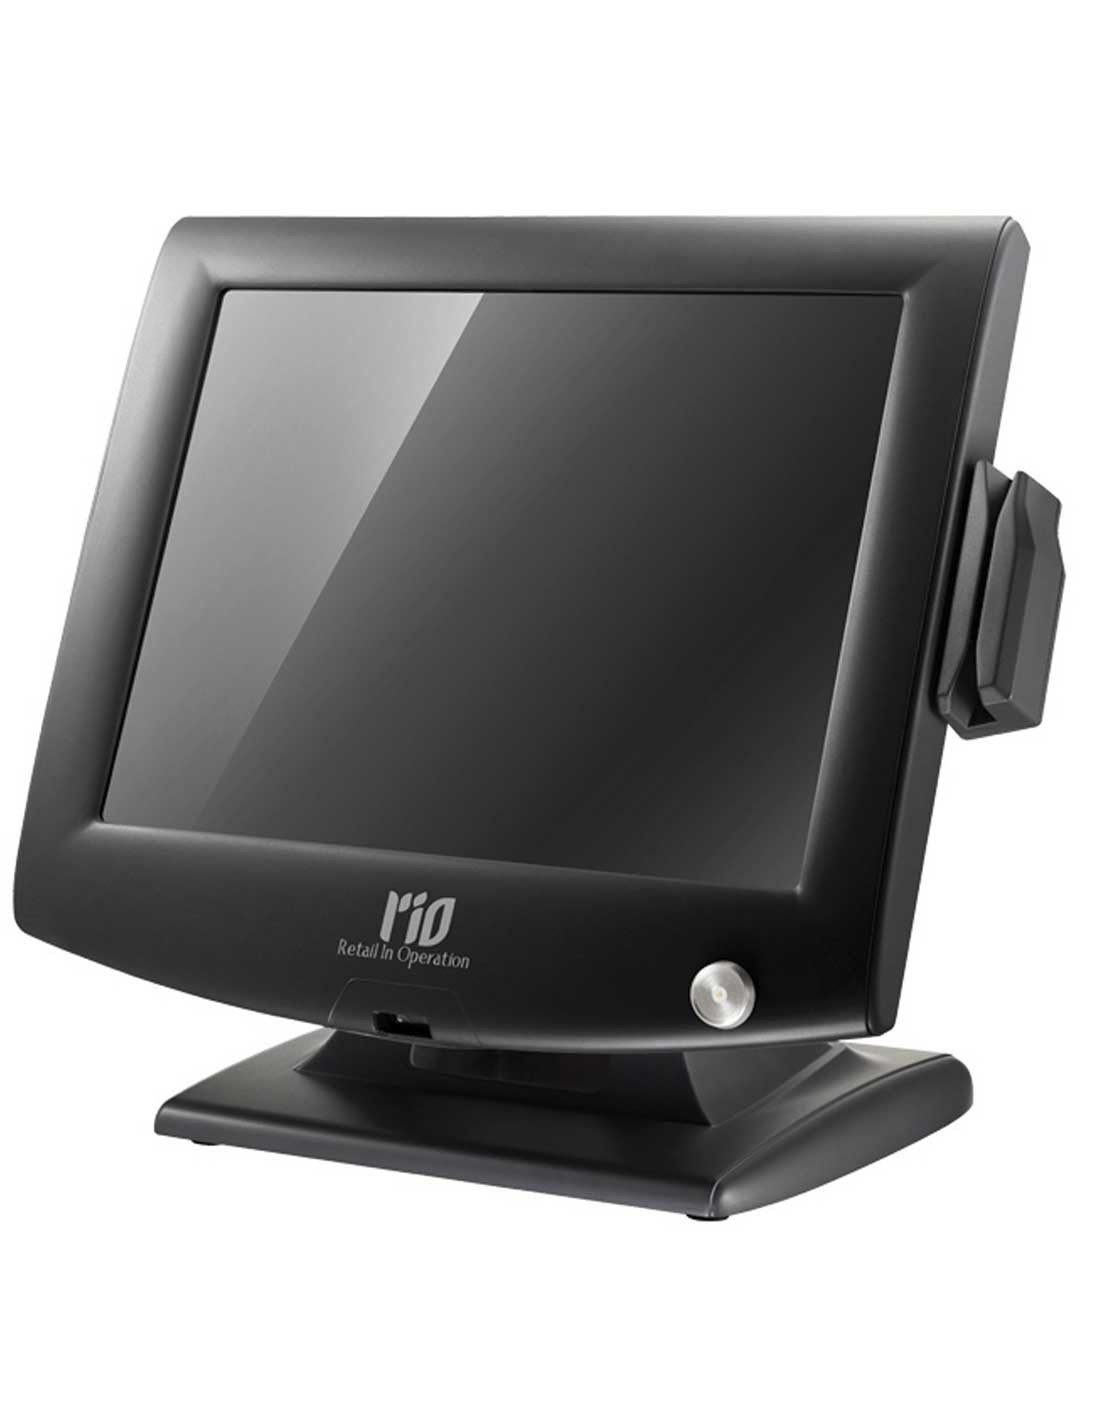 RIO Xander 5 POS Terminal at a Cheap Price and Free Delivery in Dubai UAE